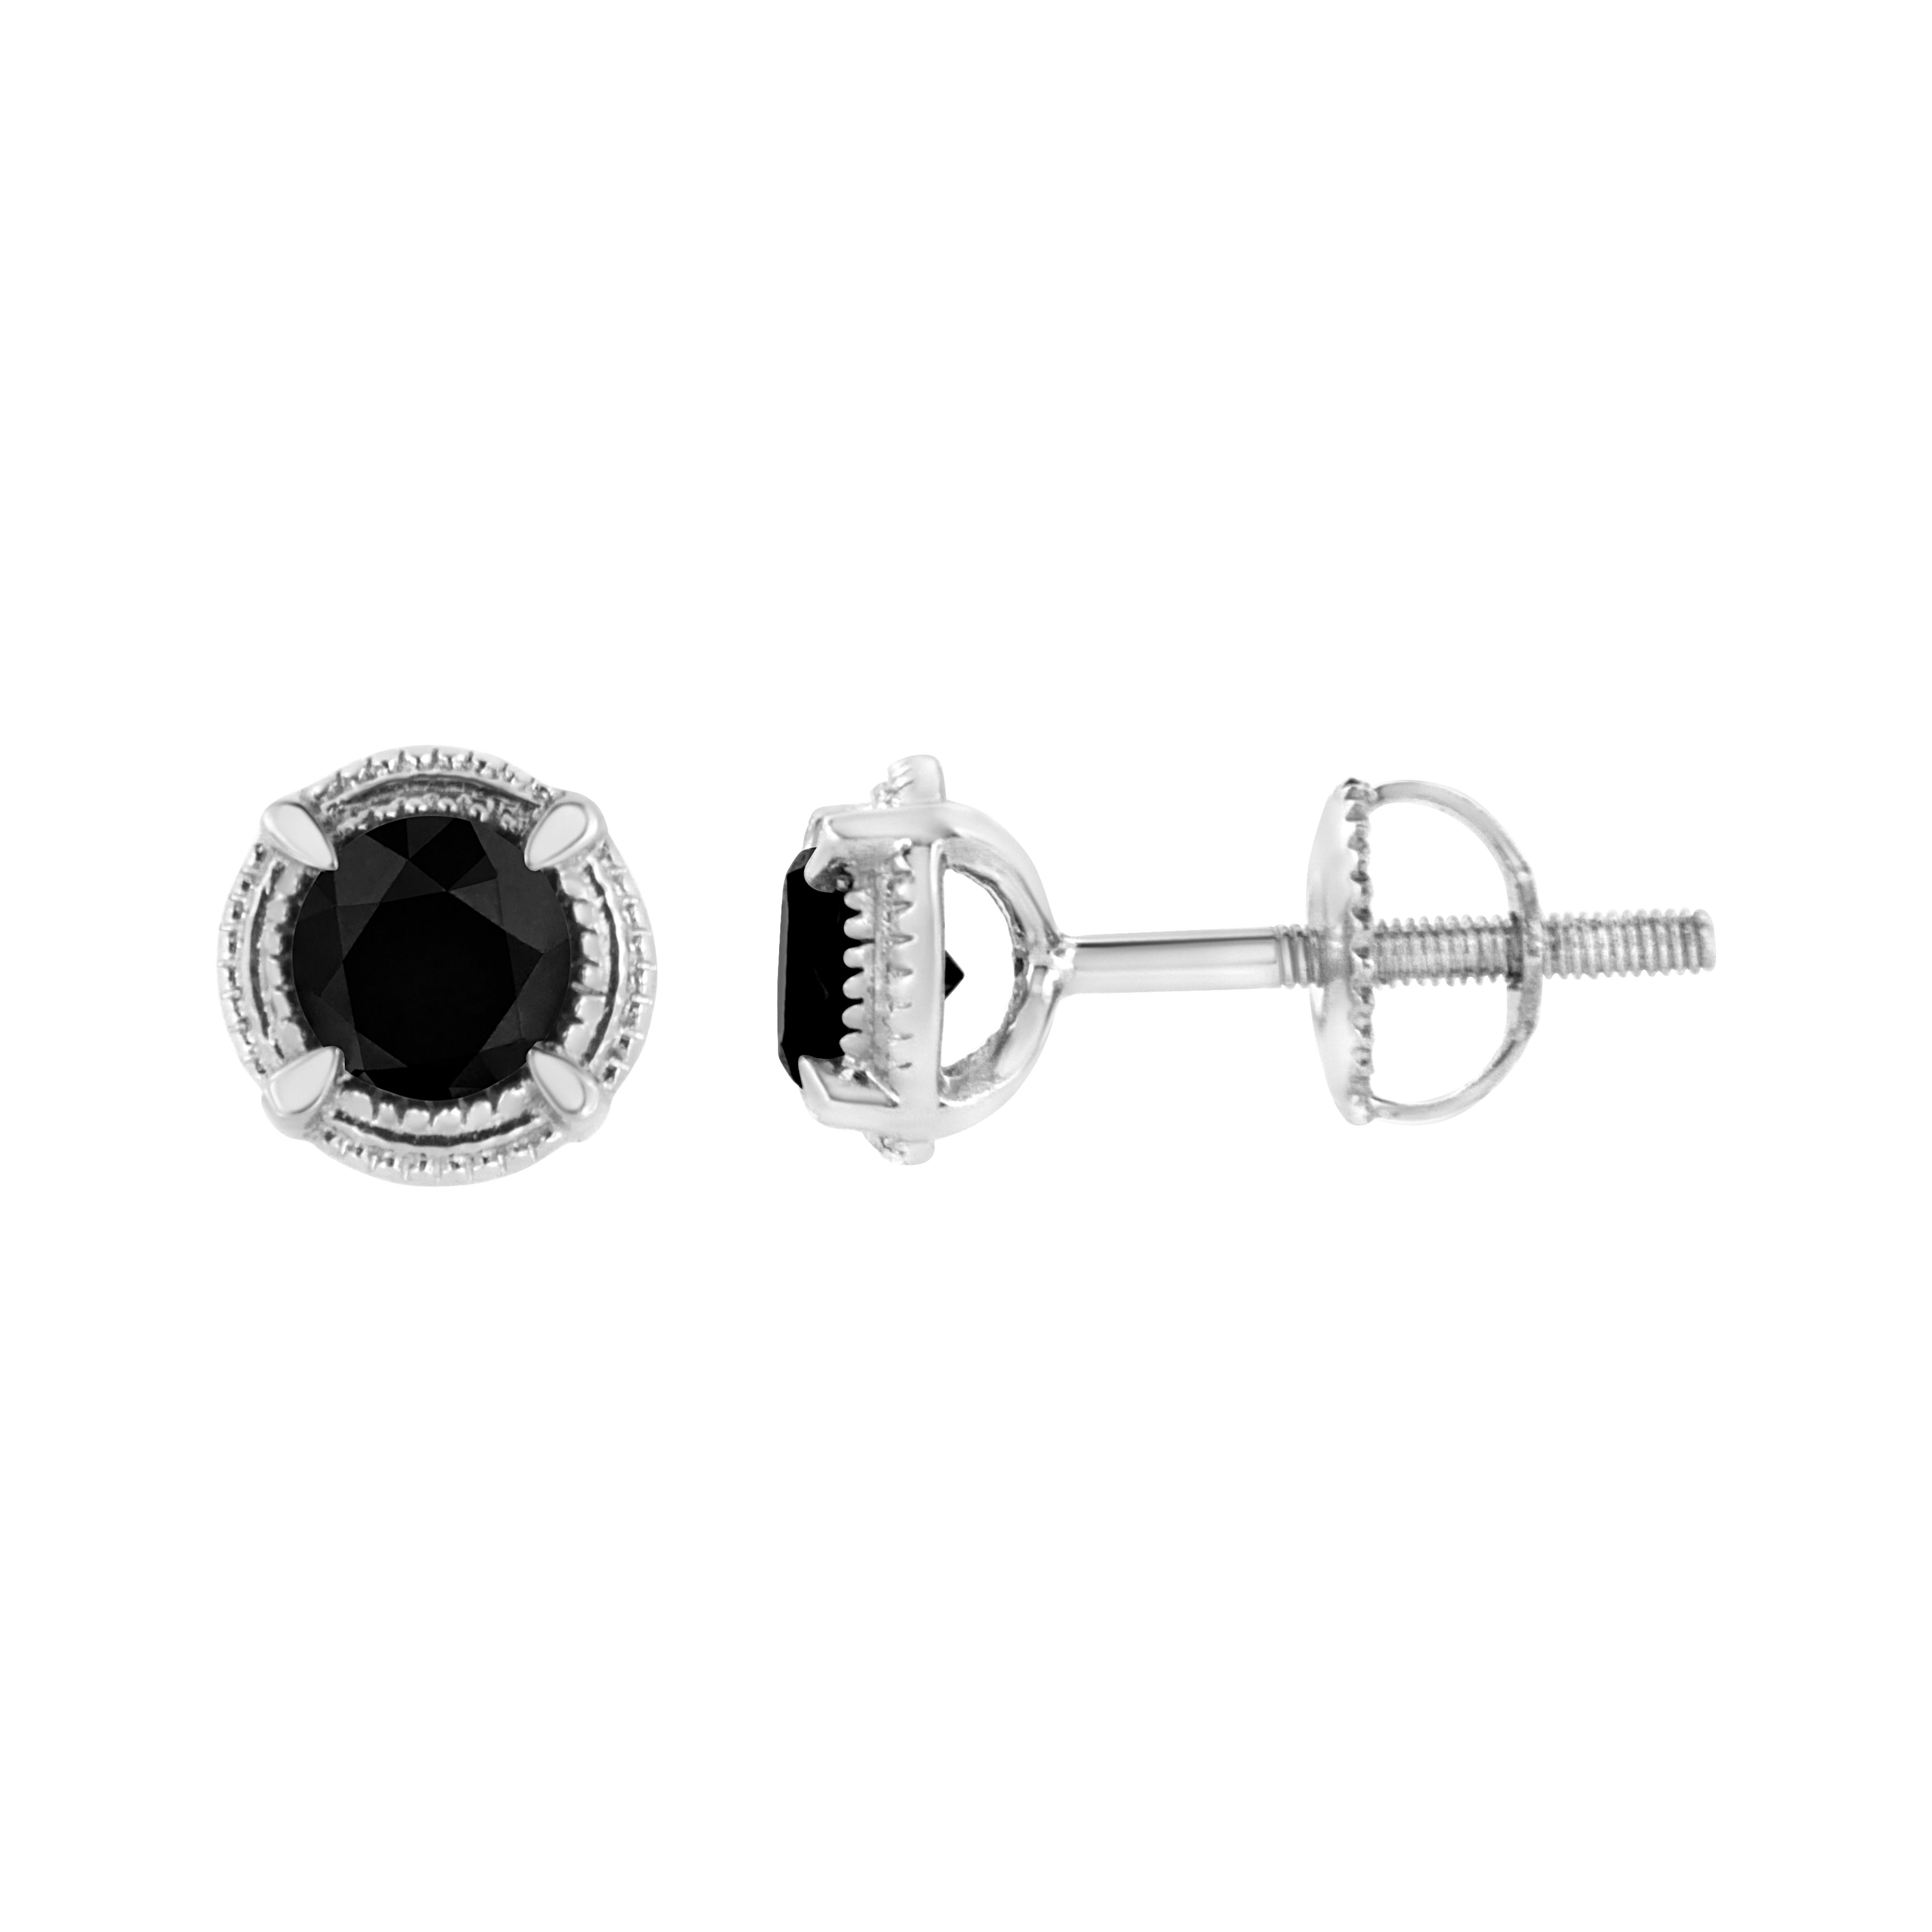 Add this stunningly unique diamond stud earrings to your jewelry collection and impress all your girlfriends. This beautiful pair of studs are made from the finest .925 sterling silver, and is embellished with treated, black round-cut diamonds in a